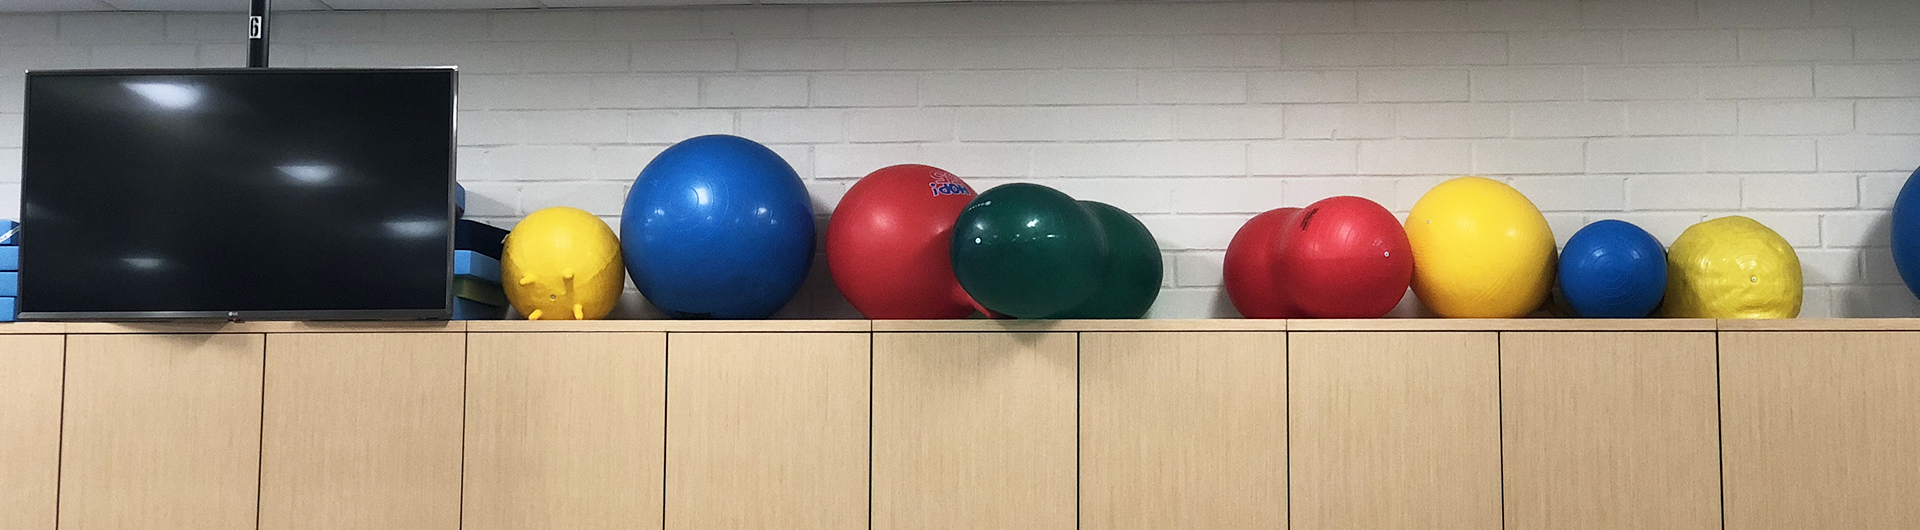 Physical therapy exercise balls